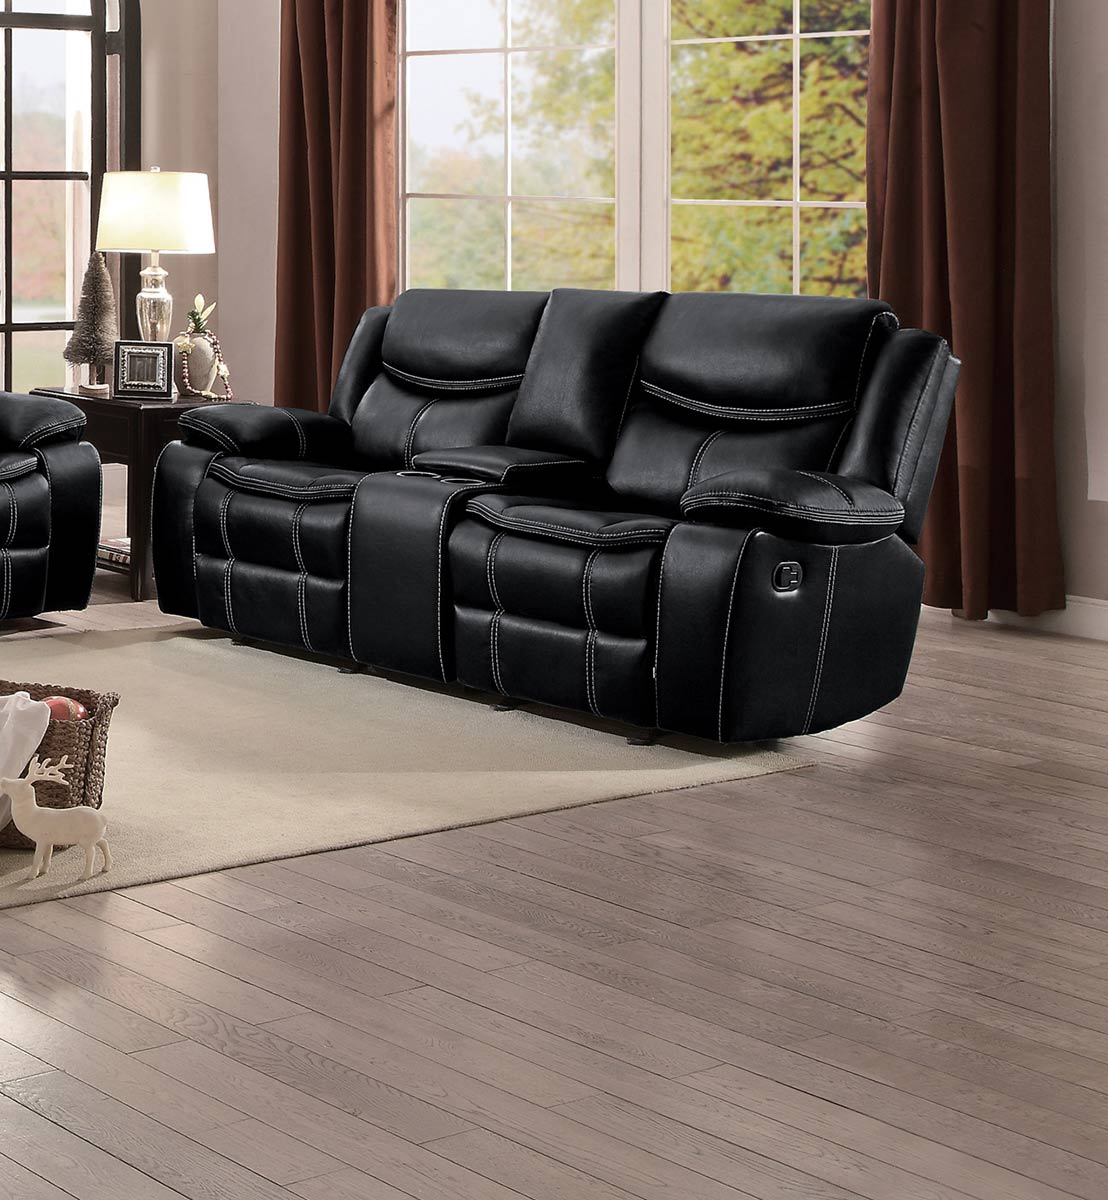 Homelegance Bastrop Double Glider Reclining Love Seat with Console - Black Leather Gel Match